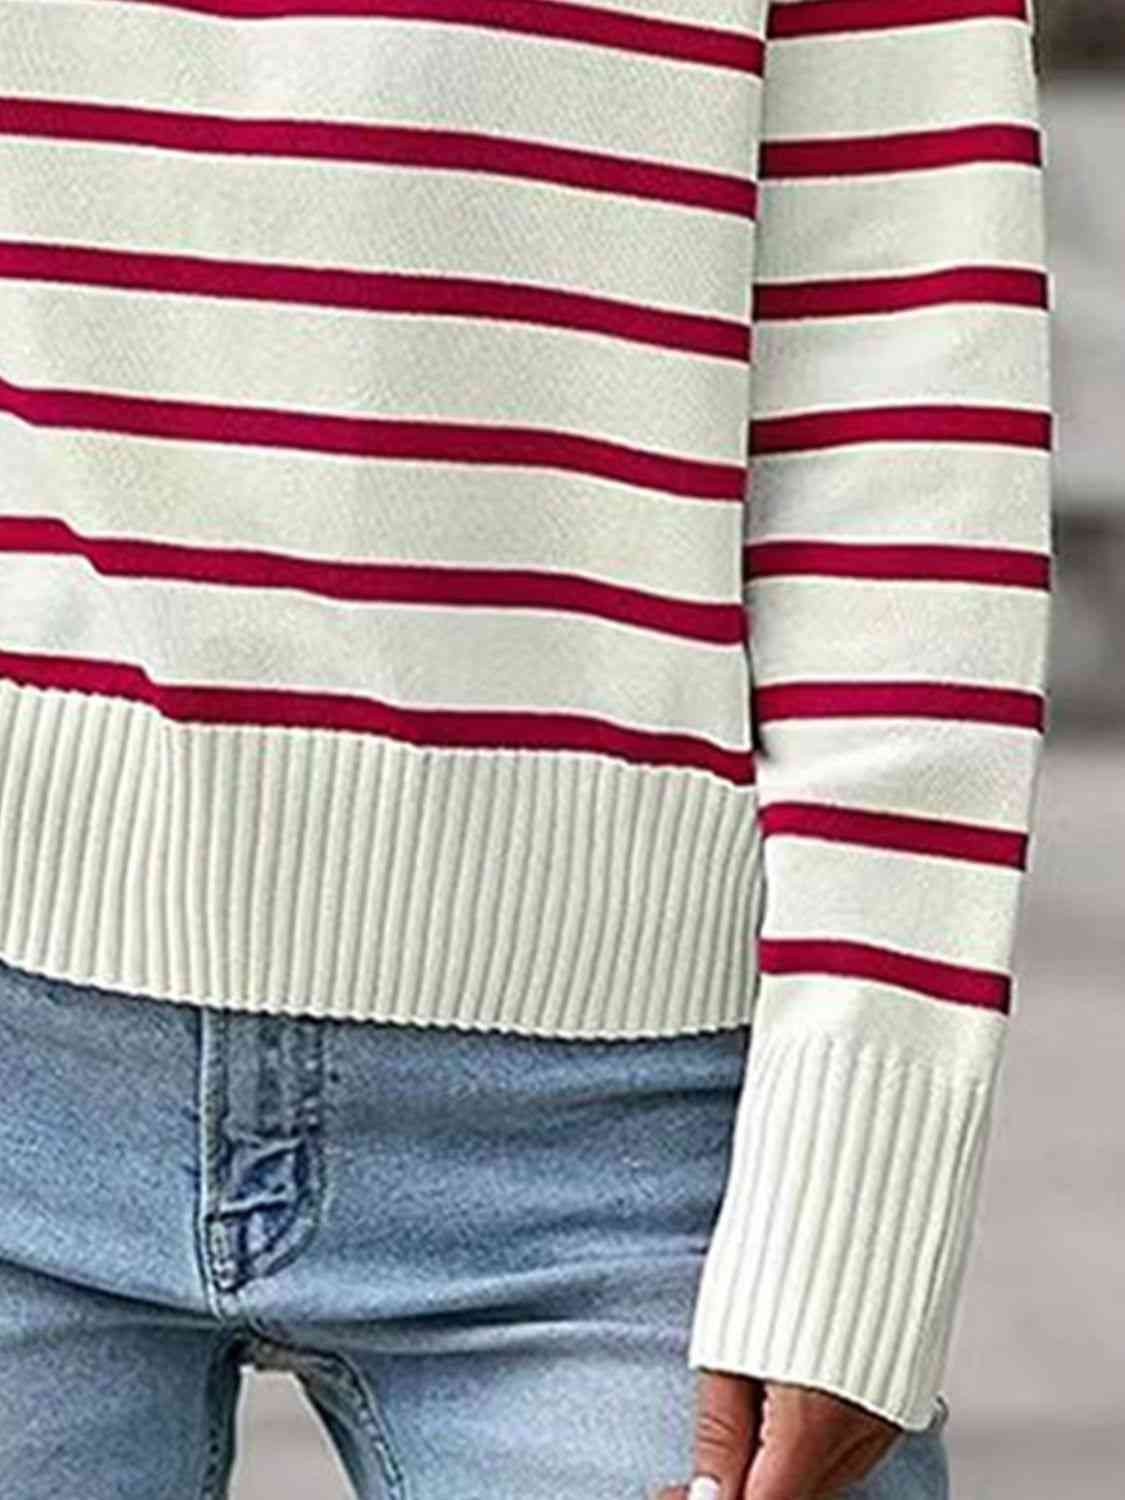 Ivy League Striped Collared Neck Knit Top